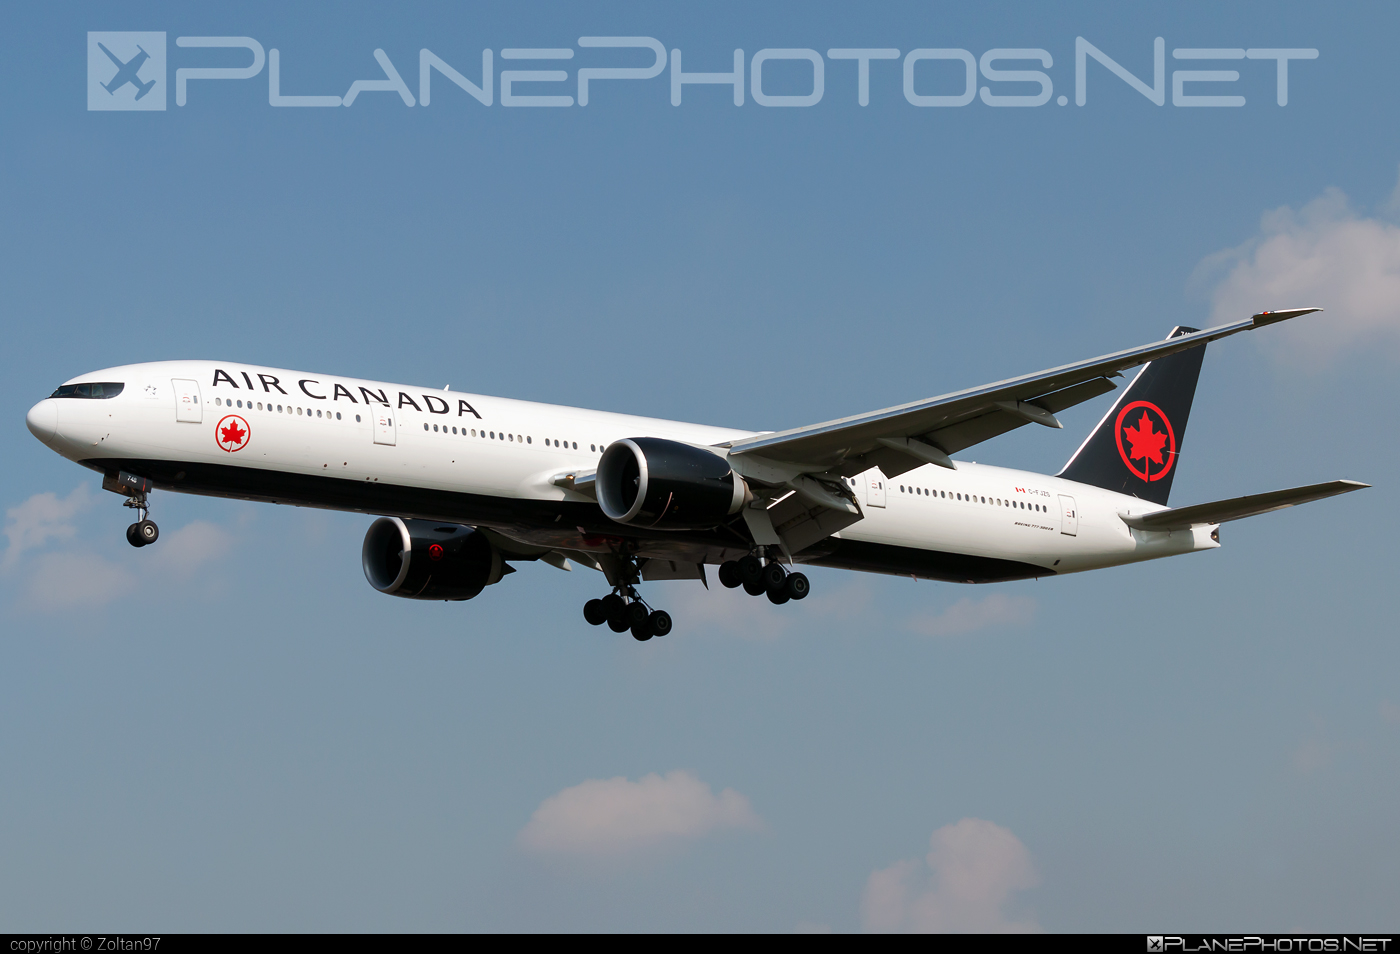 Boeing 777-300ER - C-FJZS operated by Air Canada #airCanada #b777 #b777er #boeing #boeing777 #tripleseven